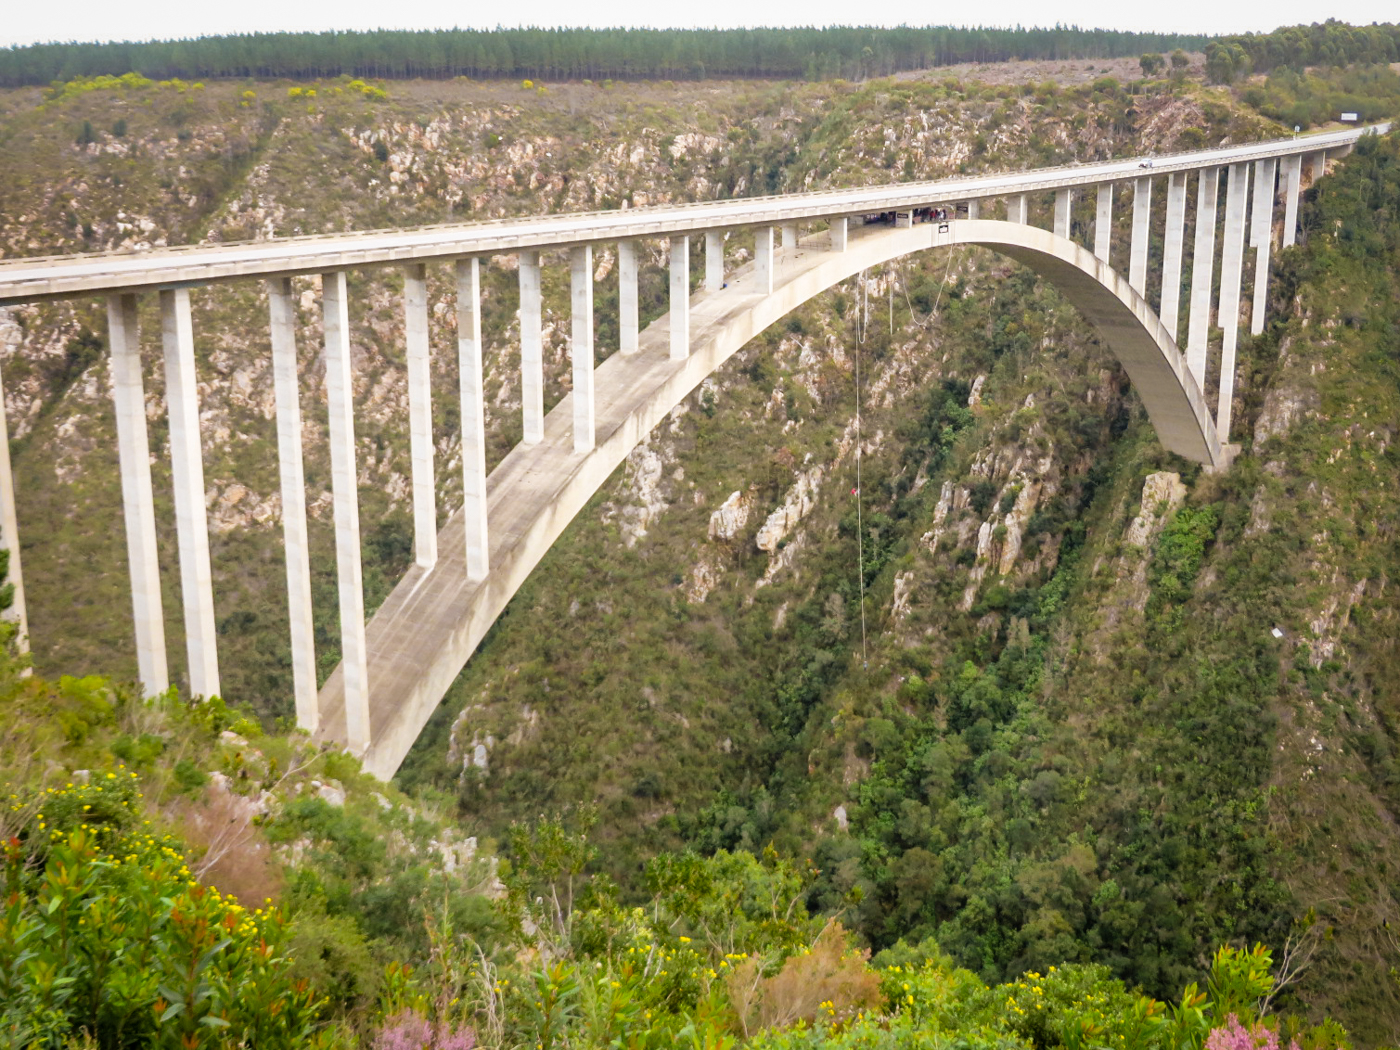 The Bloukrans Bridge with a massive valley for bungee jump